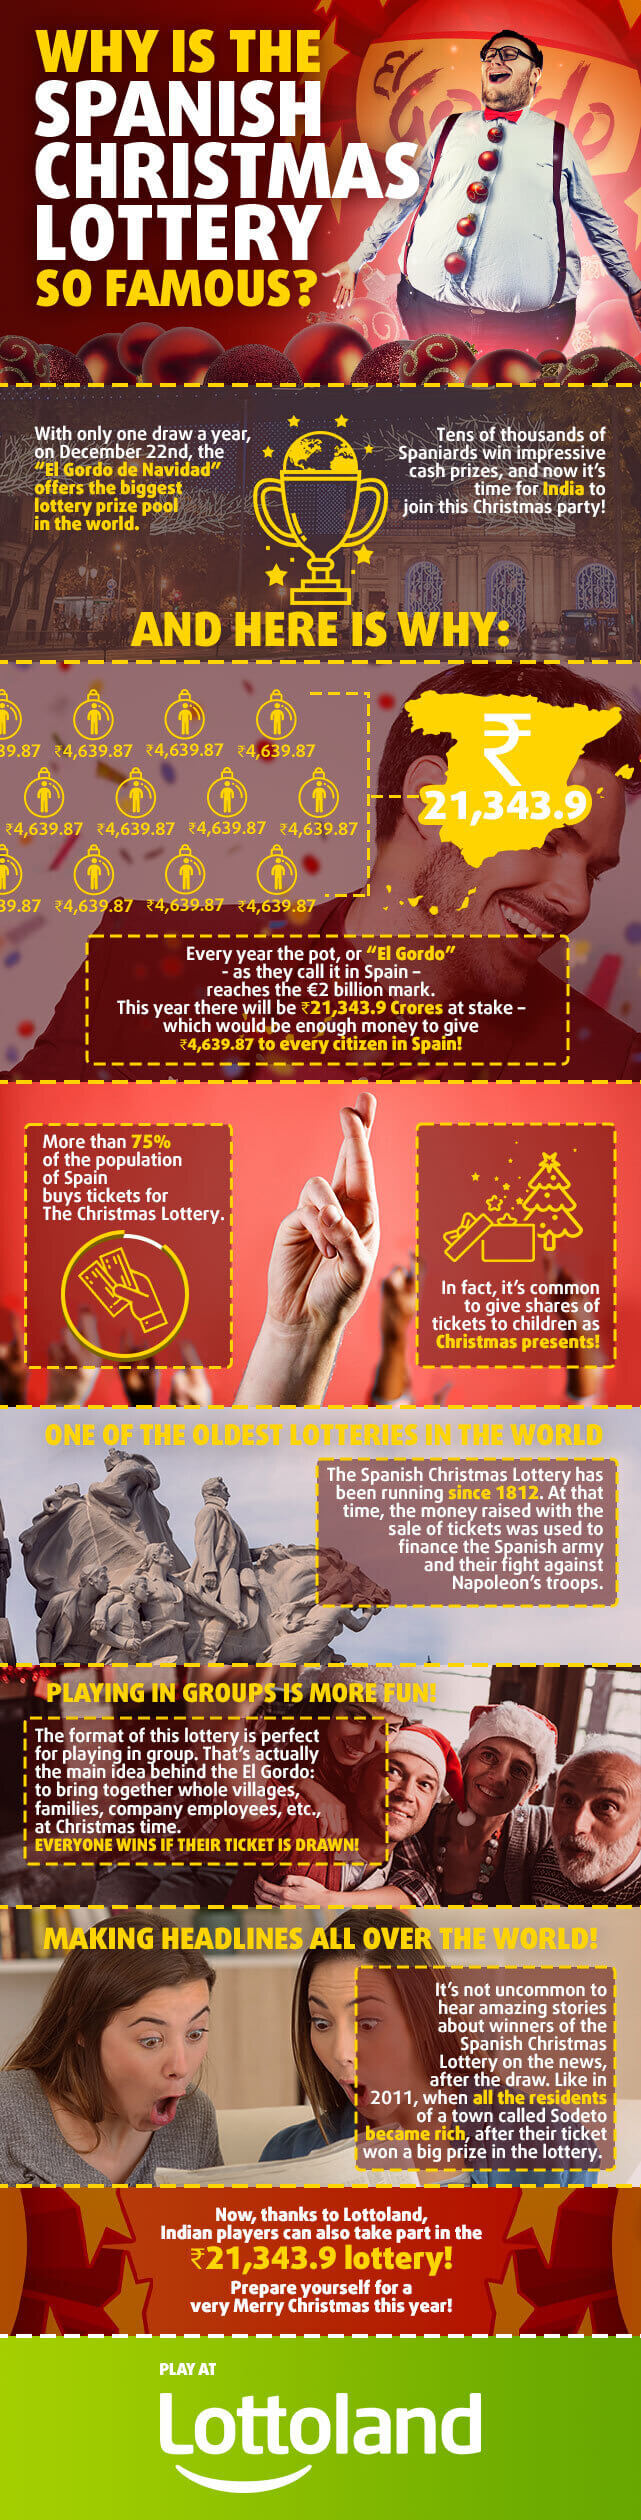 Infographic with interesting facts about the Spanish Christmas Lottery El Gordo